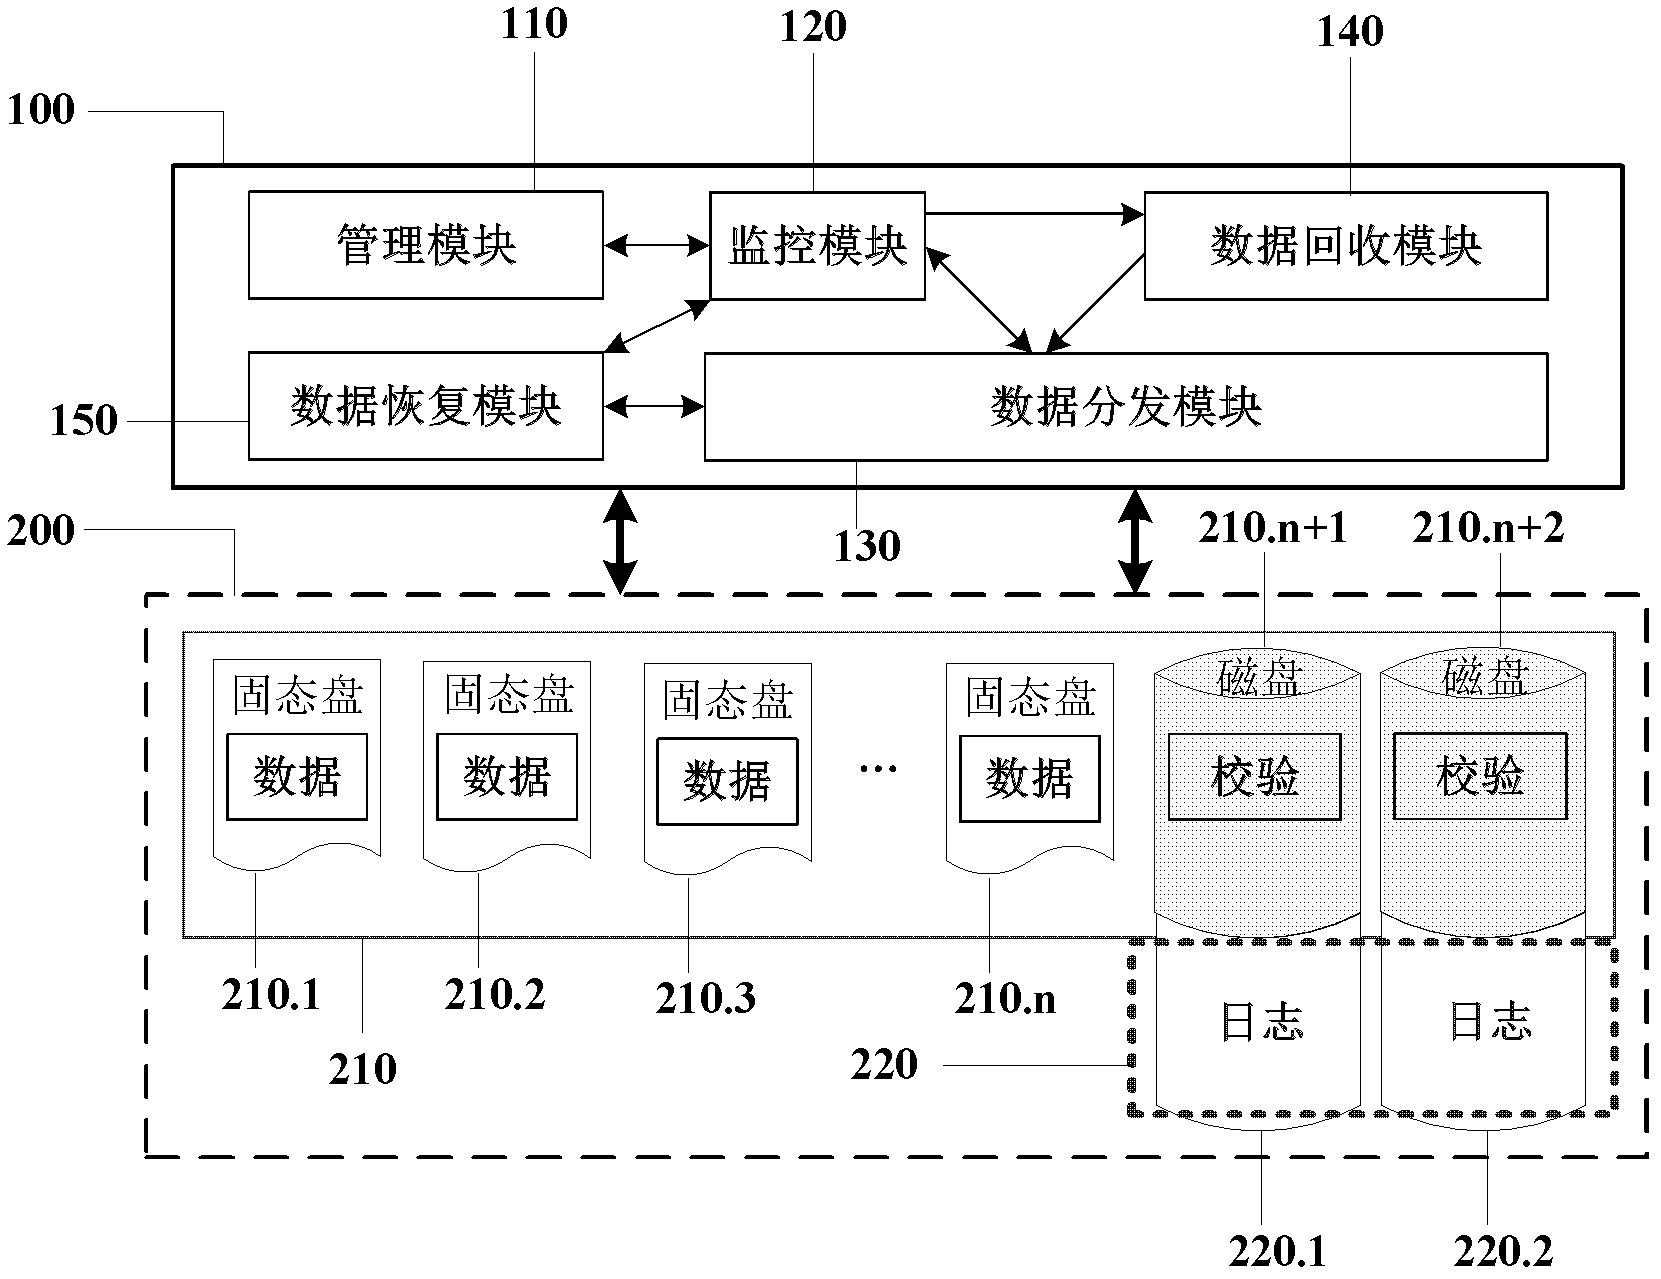 RAID6 level mixed disk array, and method for accelerating performance and improving reliability